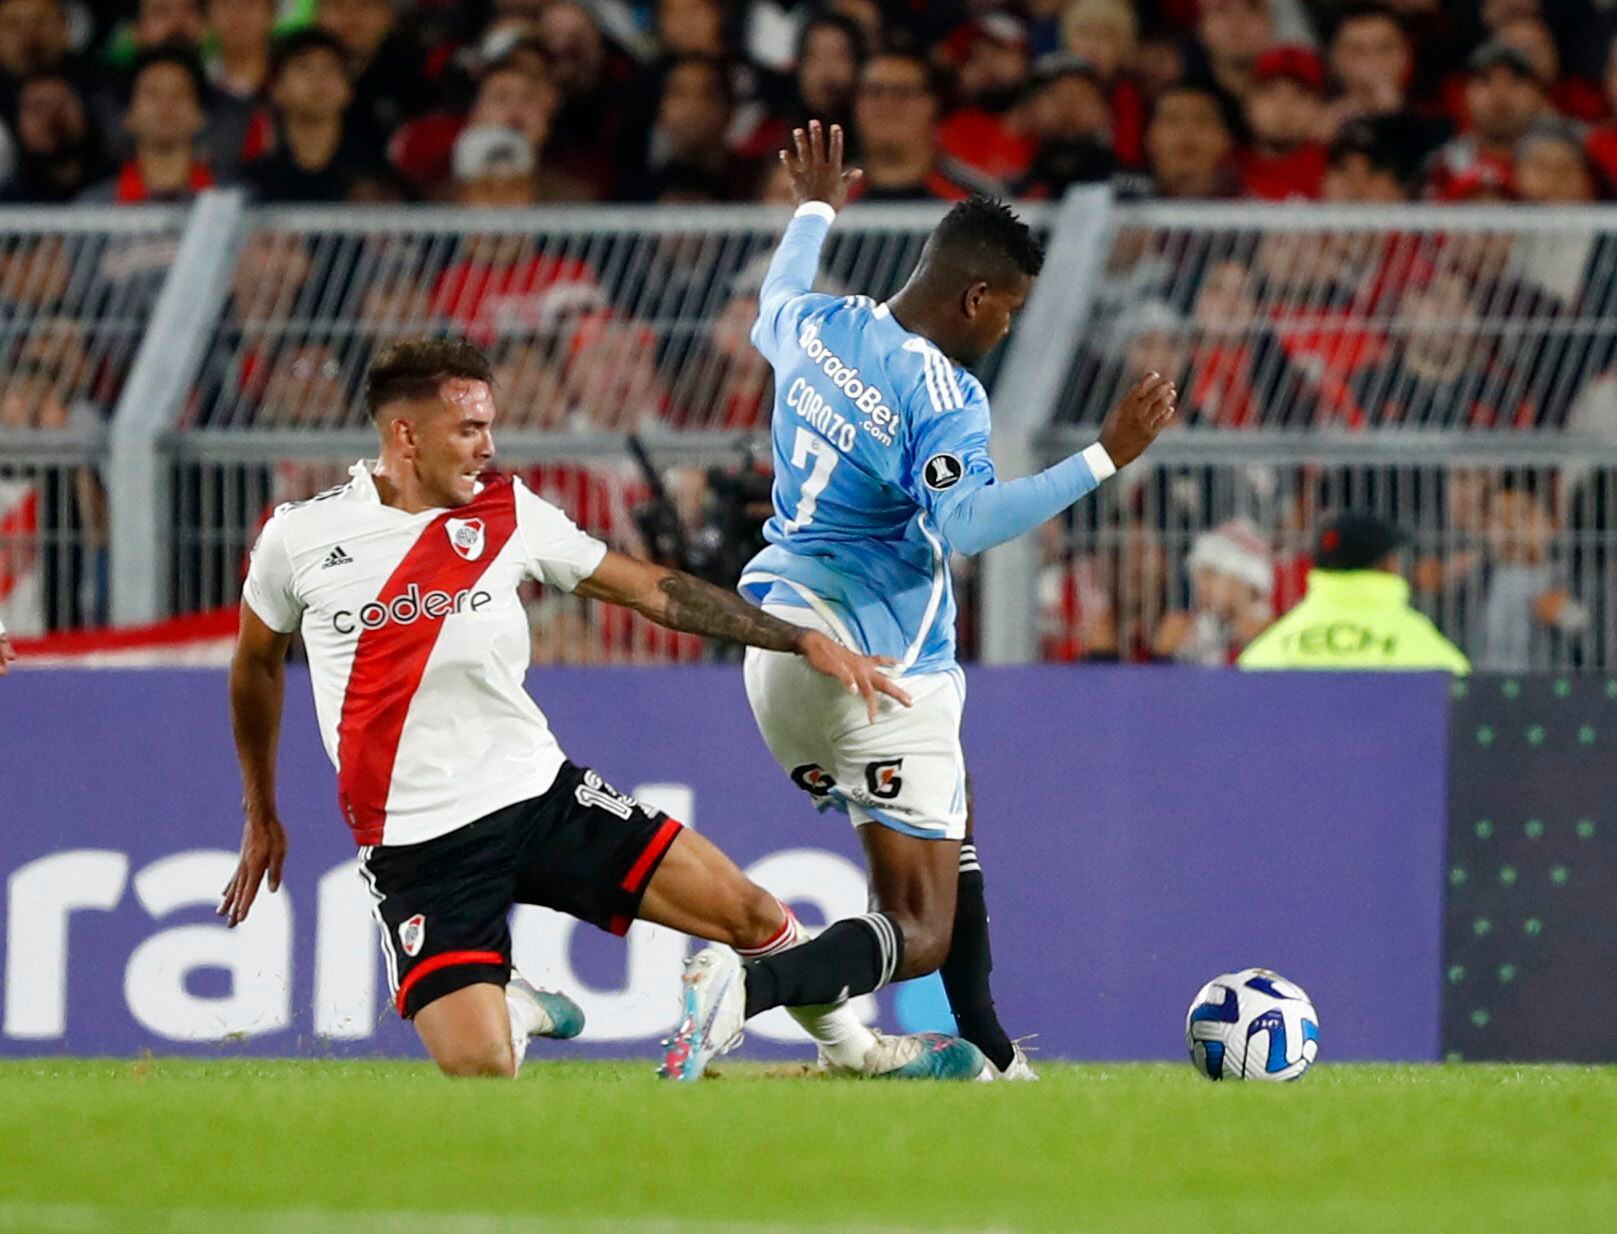 Soccer Football - Copa Libertadores - Group D - River Plate v Sporting Cristal - Estadio Monumental, Buenos Aires, Argentina - April 19, 2023 River Plate's Enzo Diaz fouls Sporting Cristal's Washington Corozo and subsequently receives a red card and is sent off REUTERS/Matias Baglietto